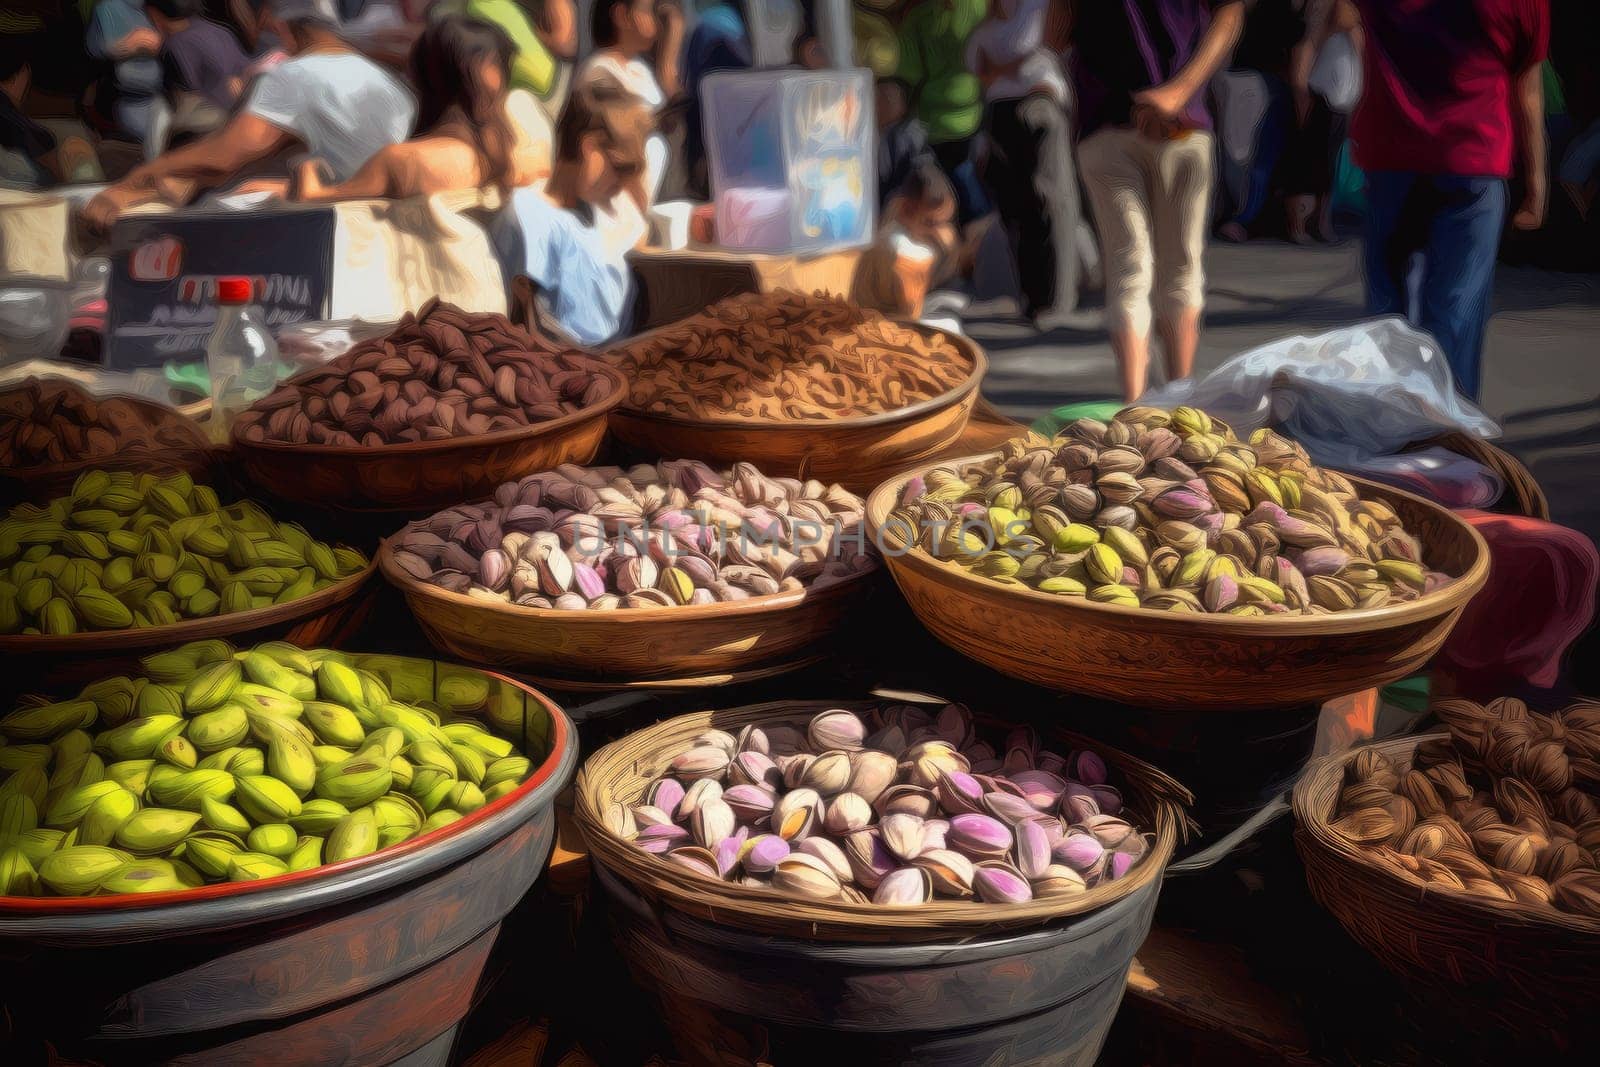 Pistachio nuts market place. Generate Ai by ylivdesign